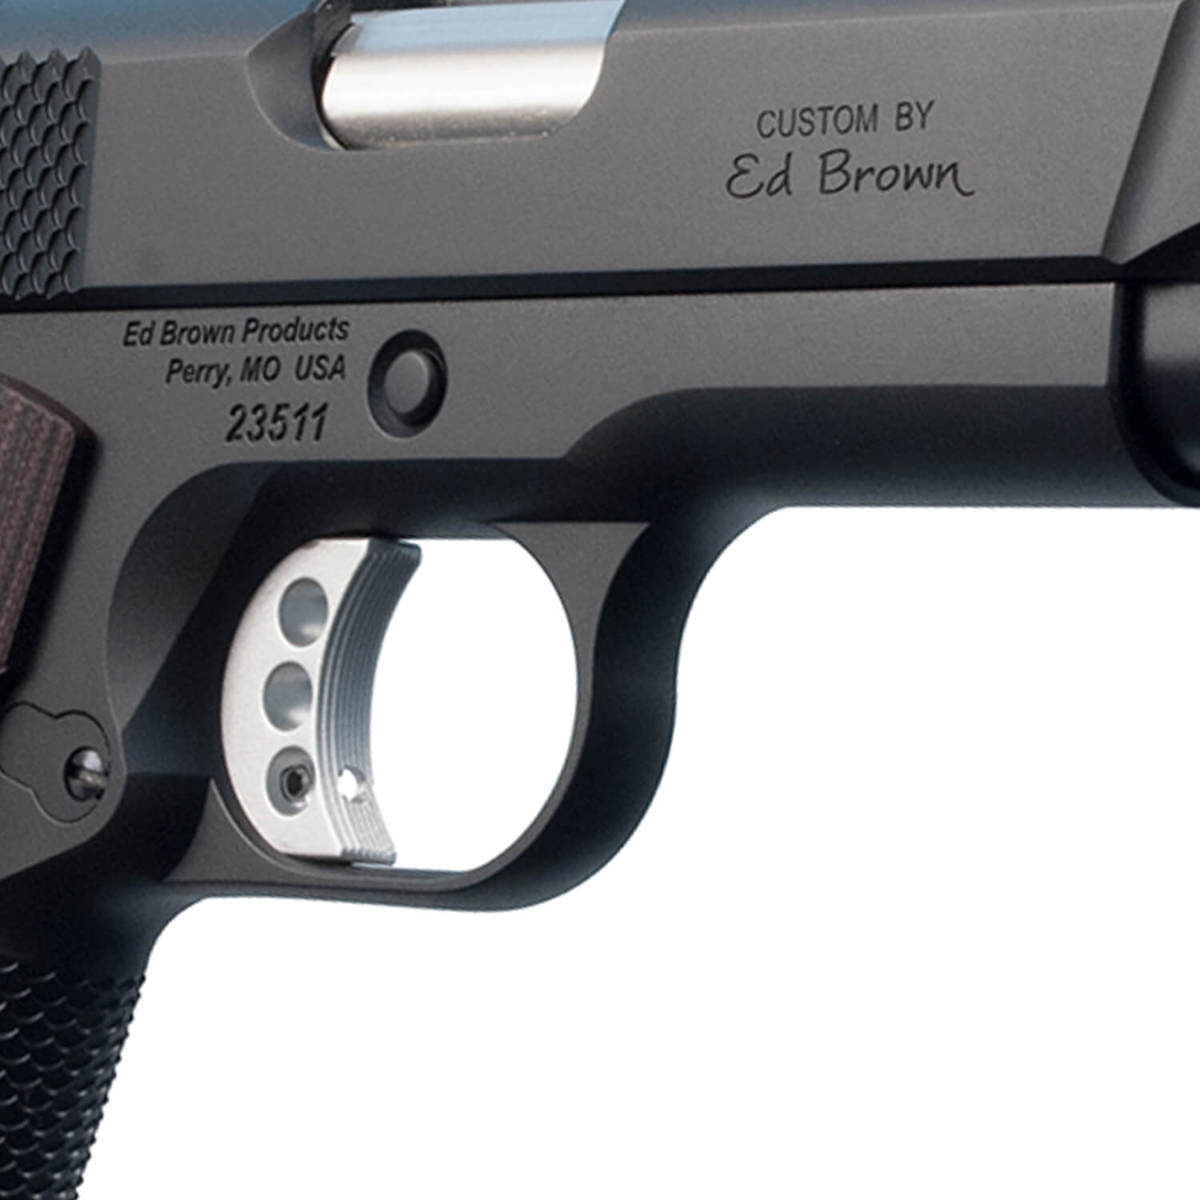 Ed Brown Kobra Carry 9mm Luger 4.25in Black Pistol - 8+1 Rounds-img-2